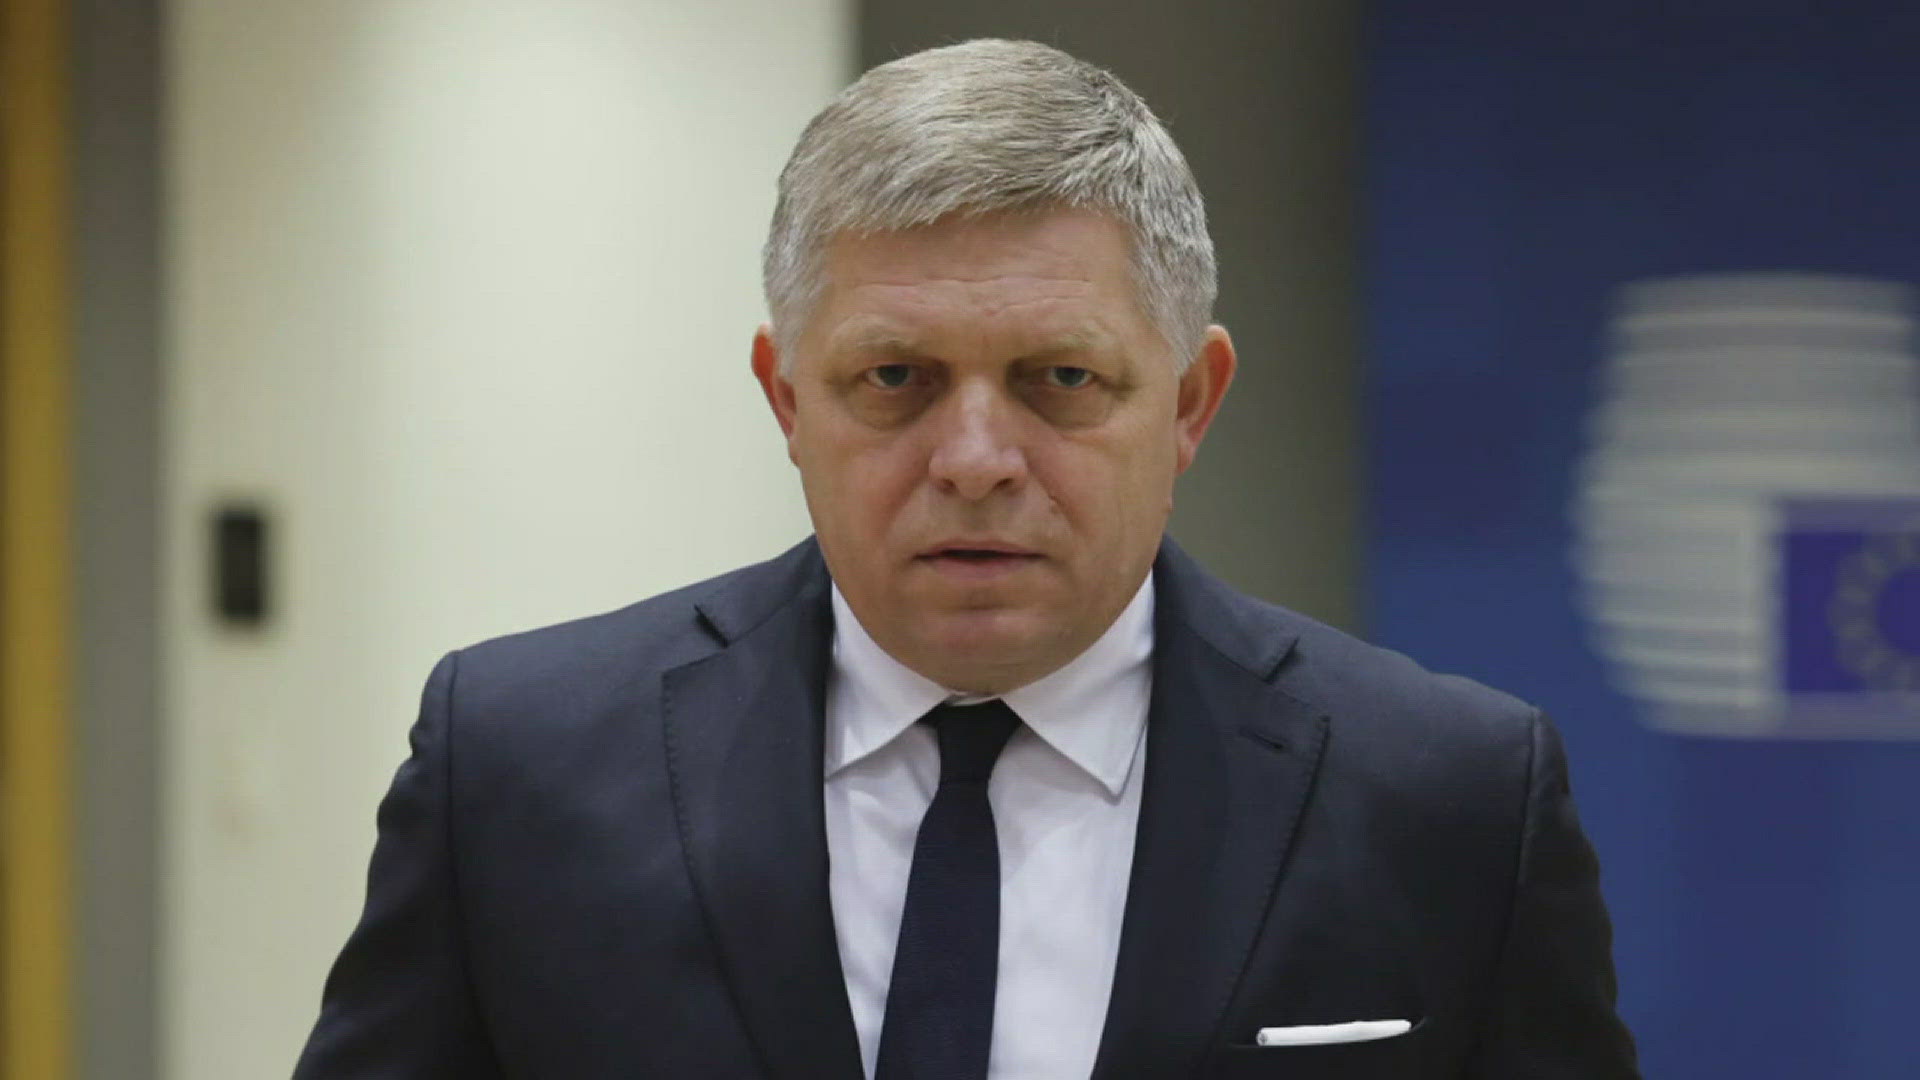 This attack is believed to be politically motivated. Prime Minister Robert Fico is known for supporting Russian military operations in Ukraine.